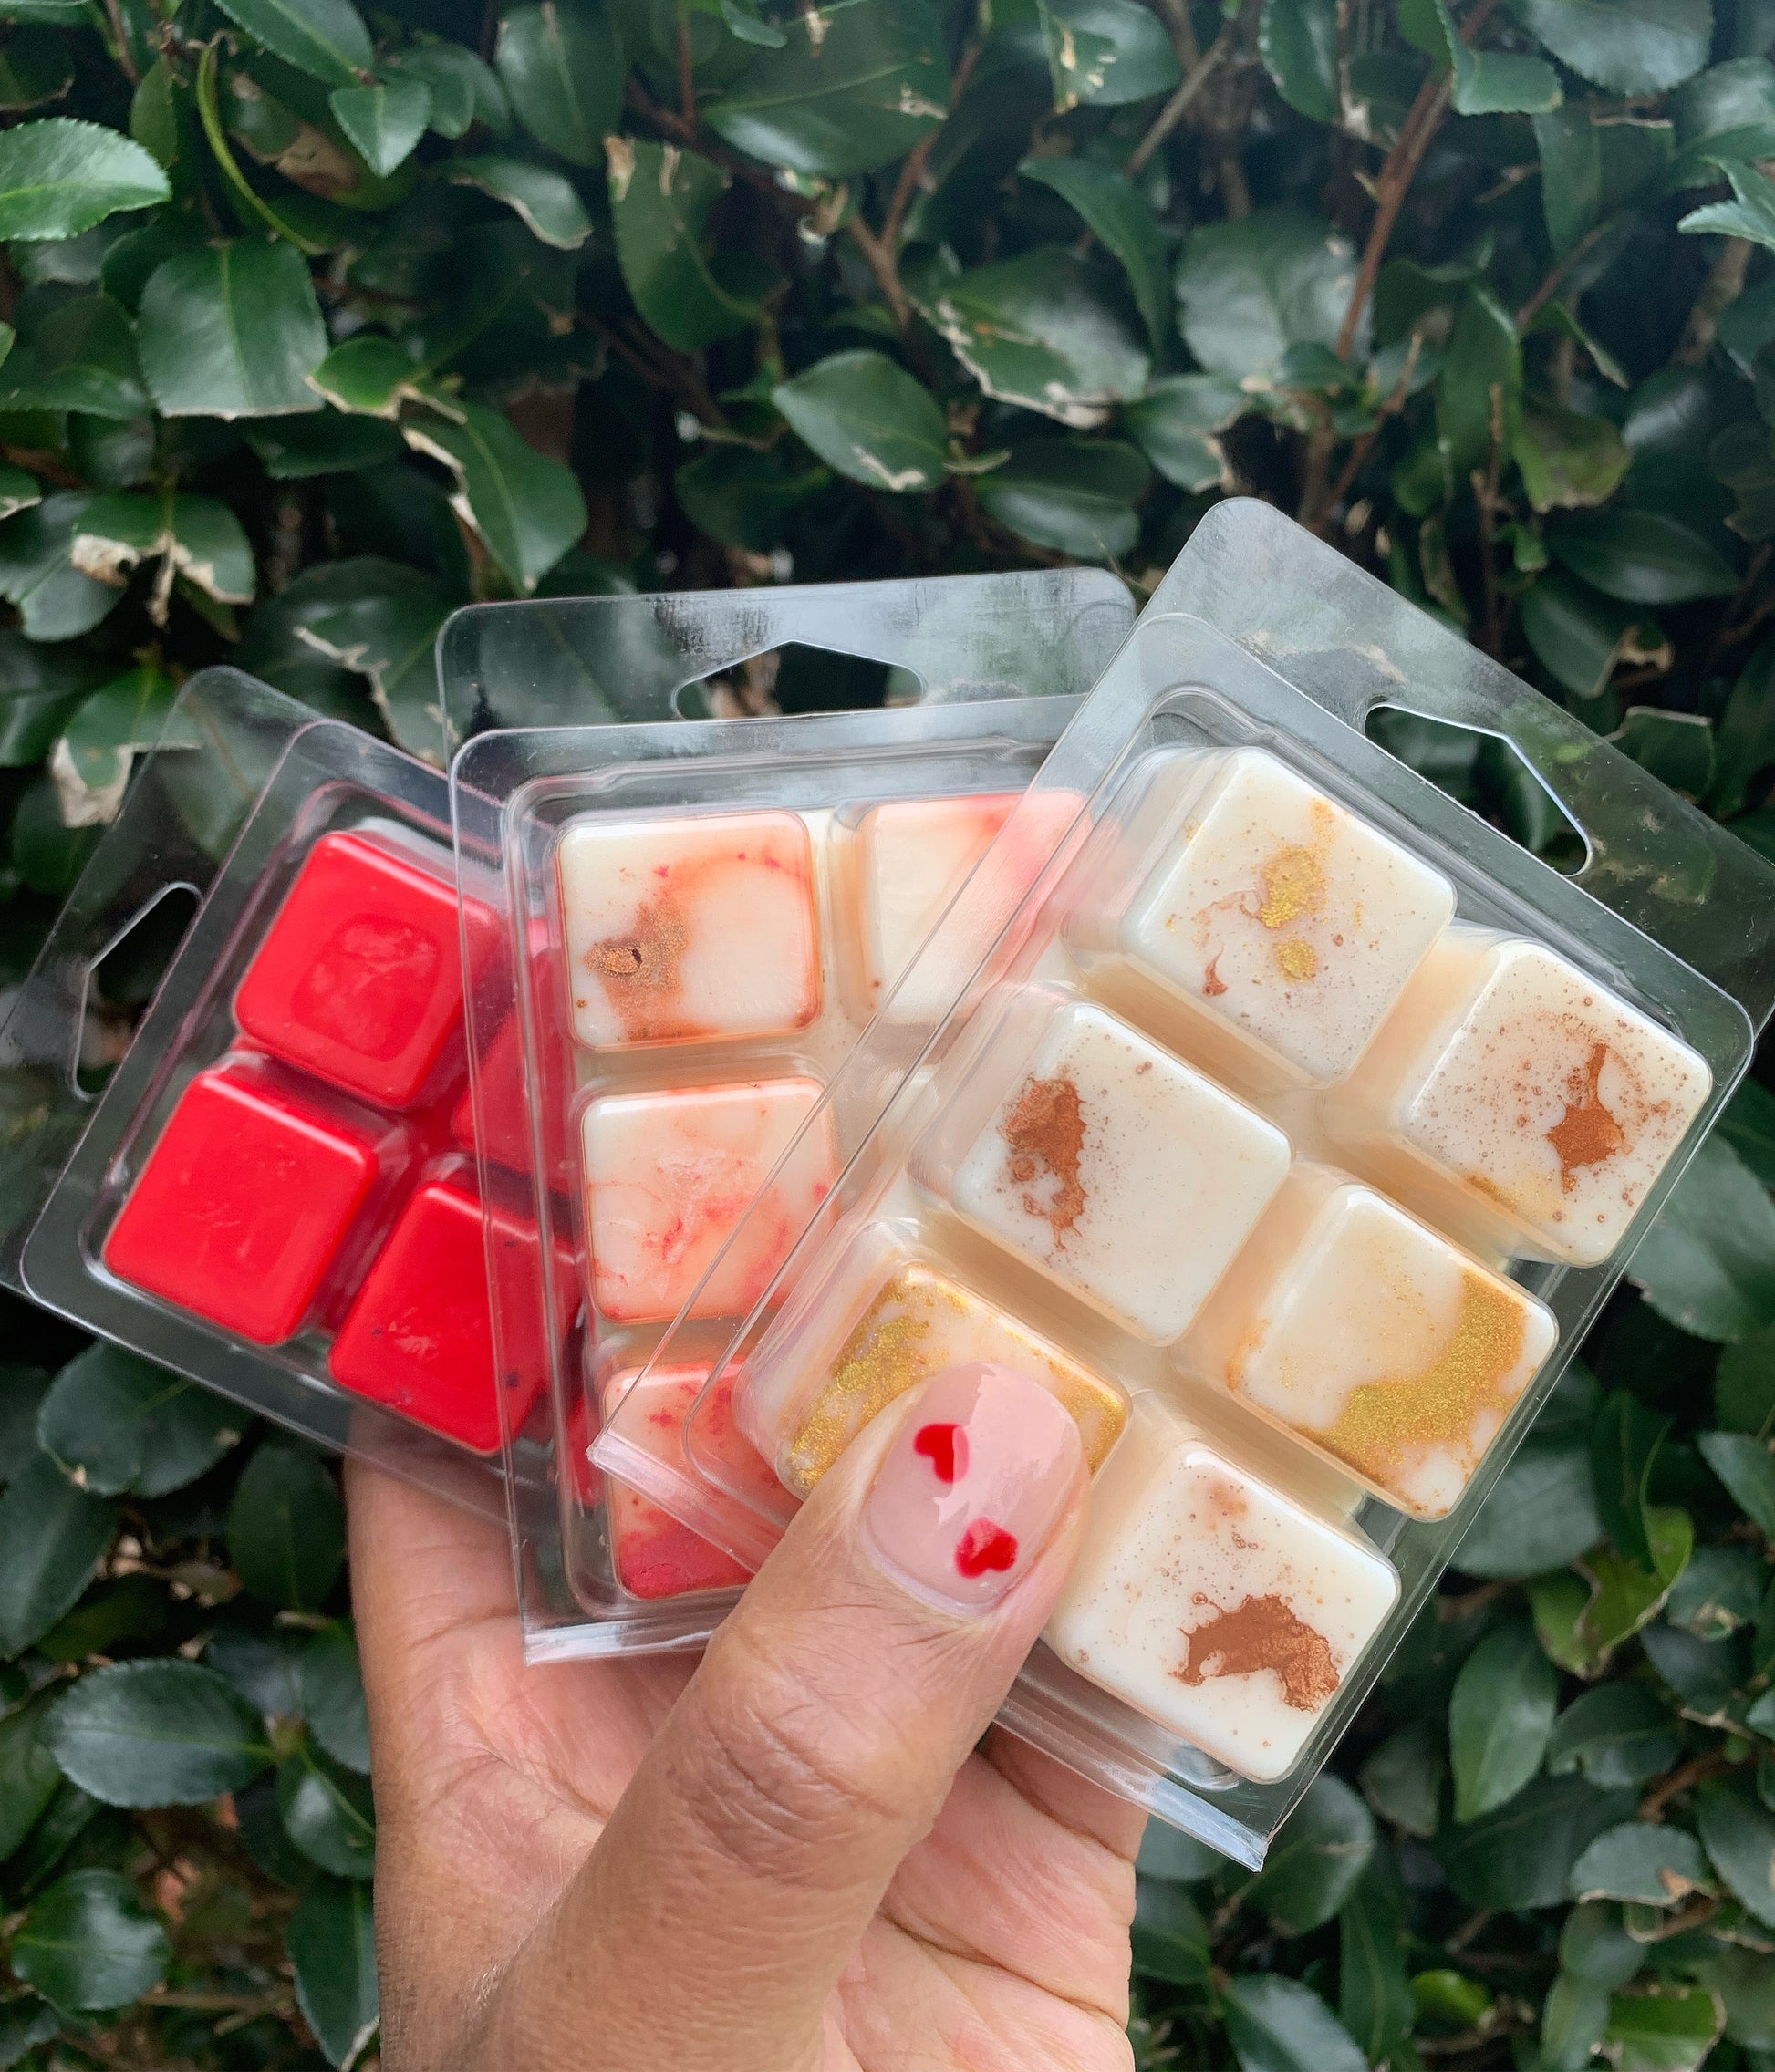 Soy Wax Melts - Organically Wicked